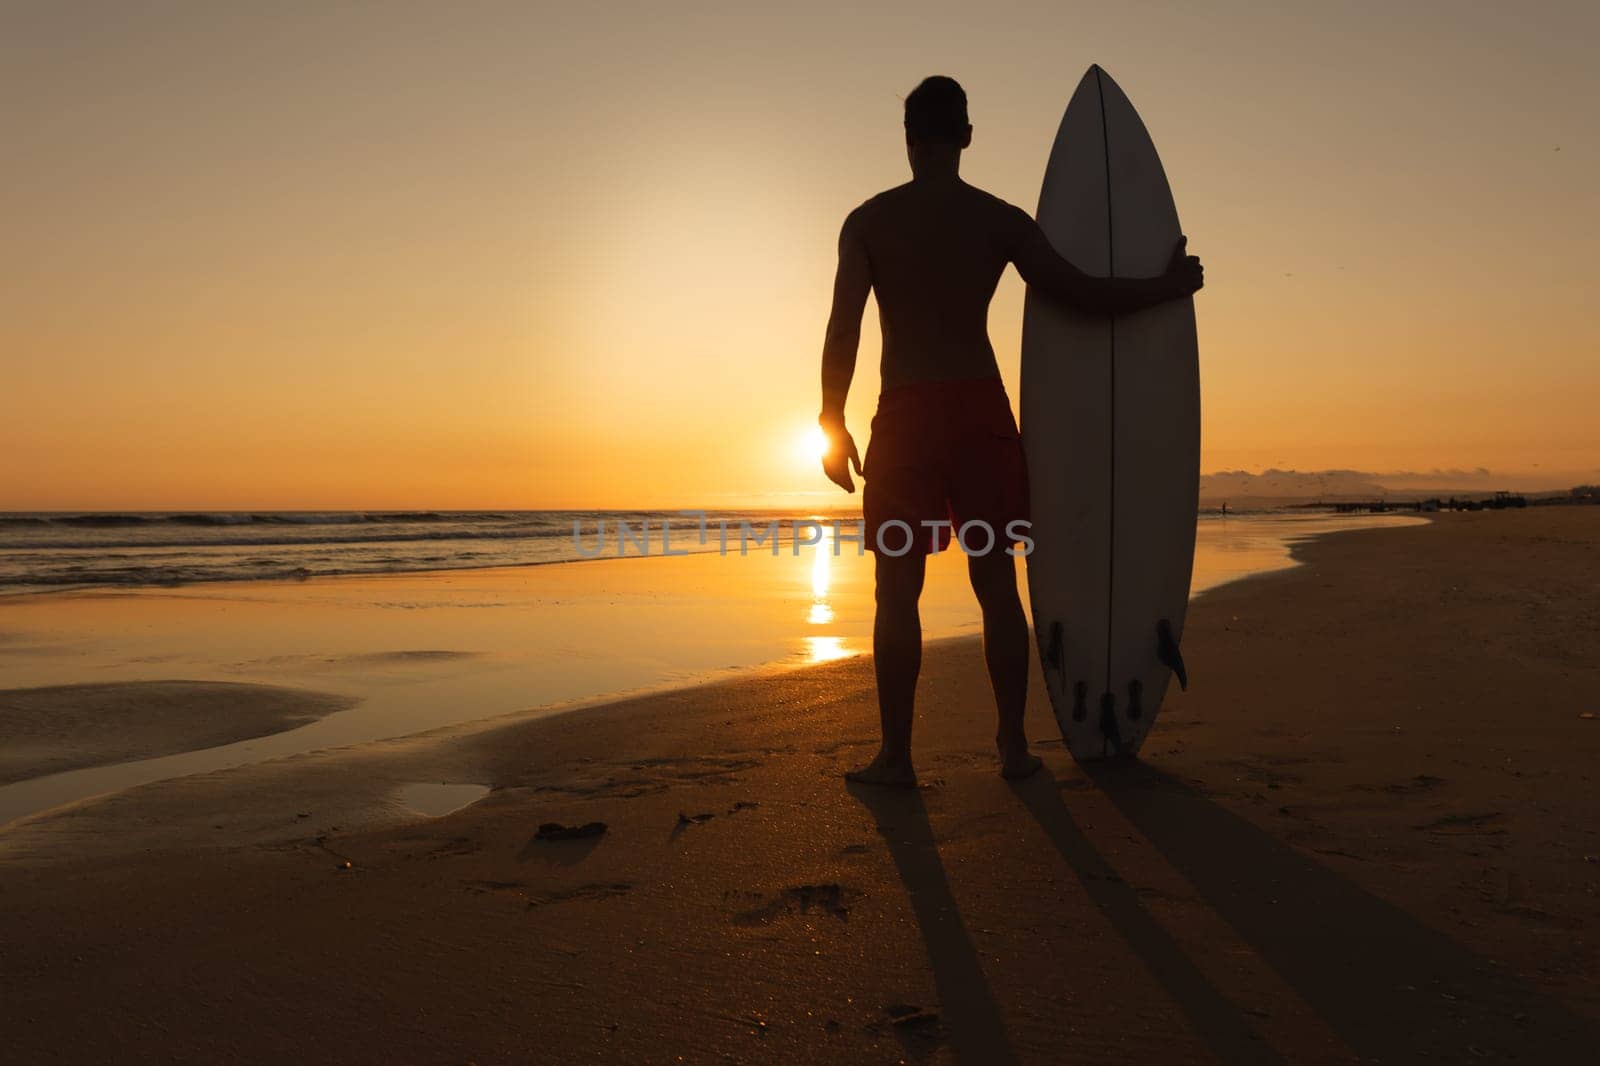 Black silhouette of a man standing on the shore at sunset. Mid shot